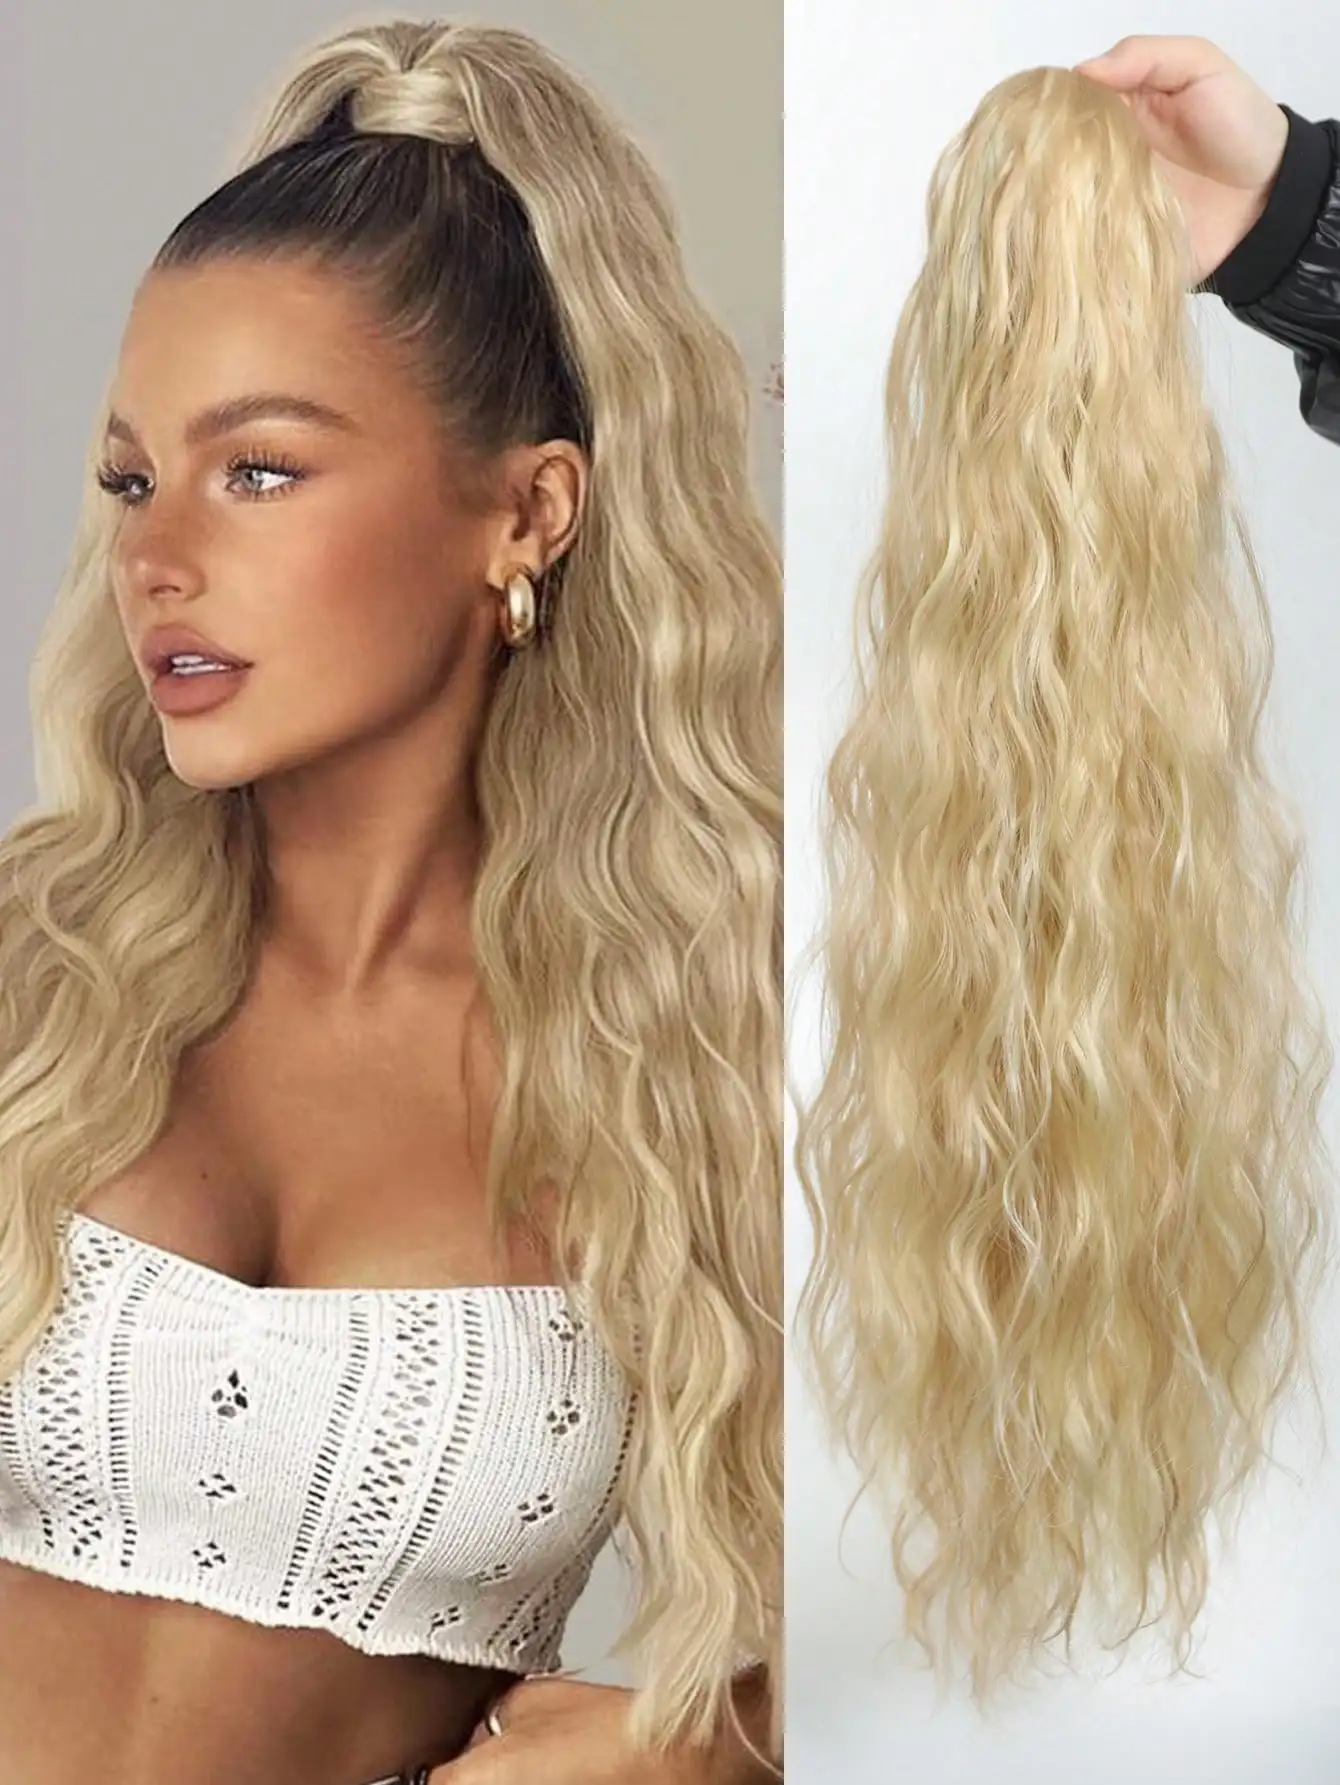 

Aosiwig Synthetic Long Ponytails Curly Wavy Hair Black Blonde Ponytails Extensions Accessories For Women Fake False Hairpieces